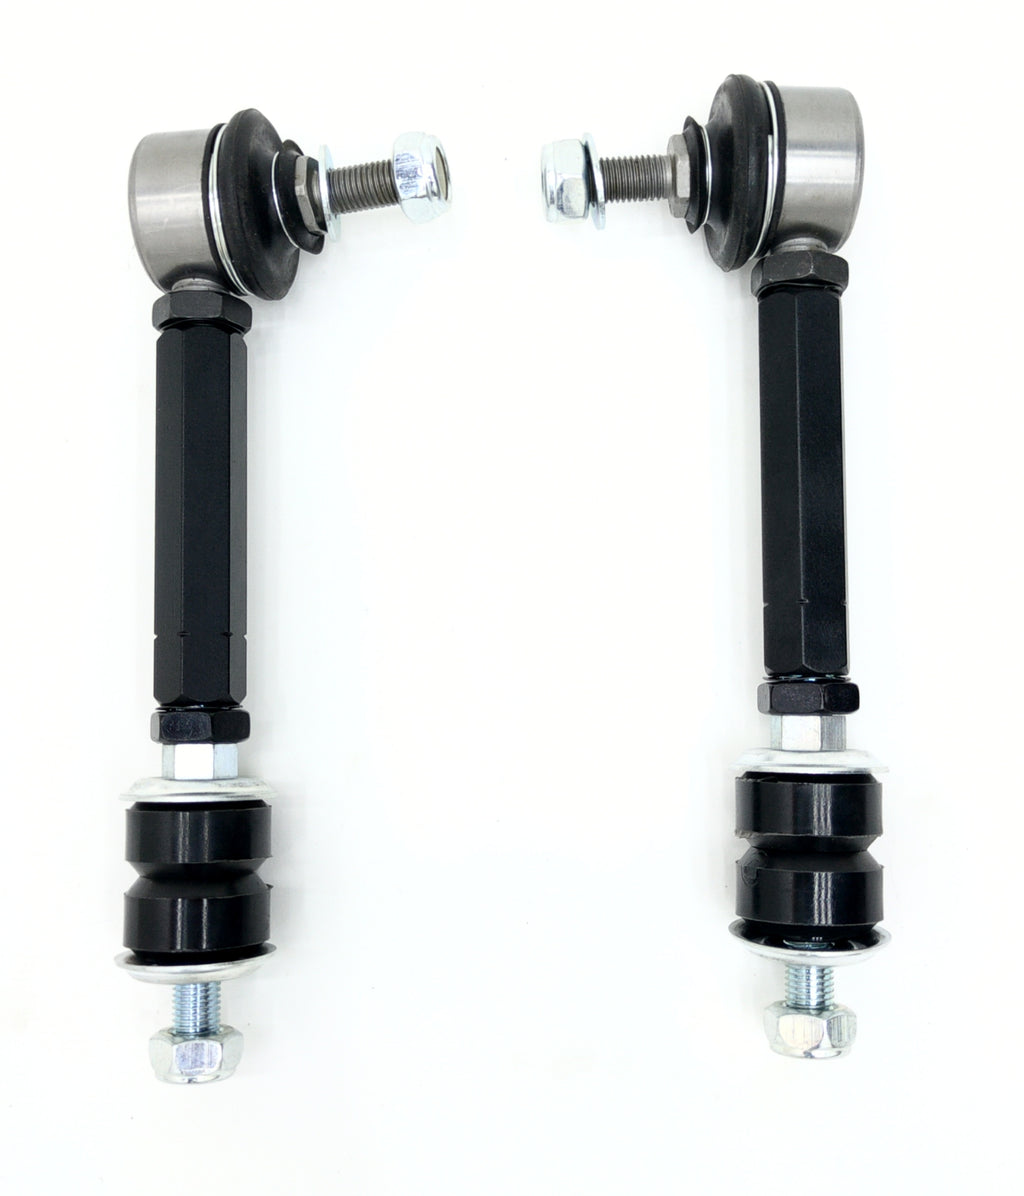 HURRICANE PERFORMANCE ADJUSTABLE FRONT SWAY BAR LINKS  FOR NISSAN Y61